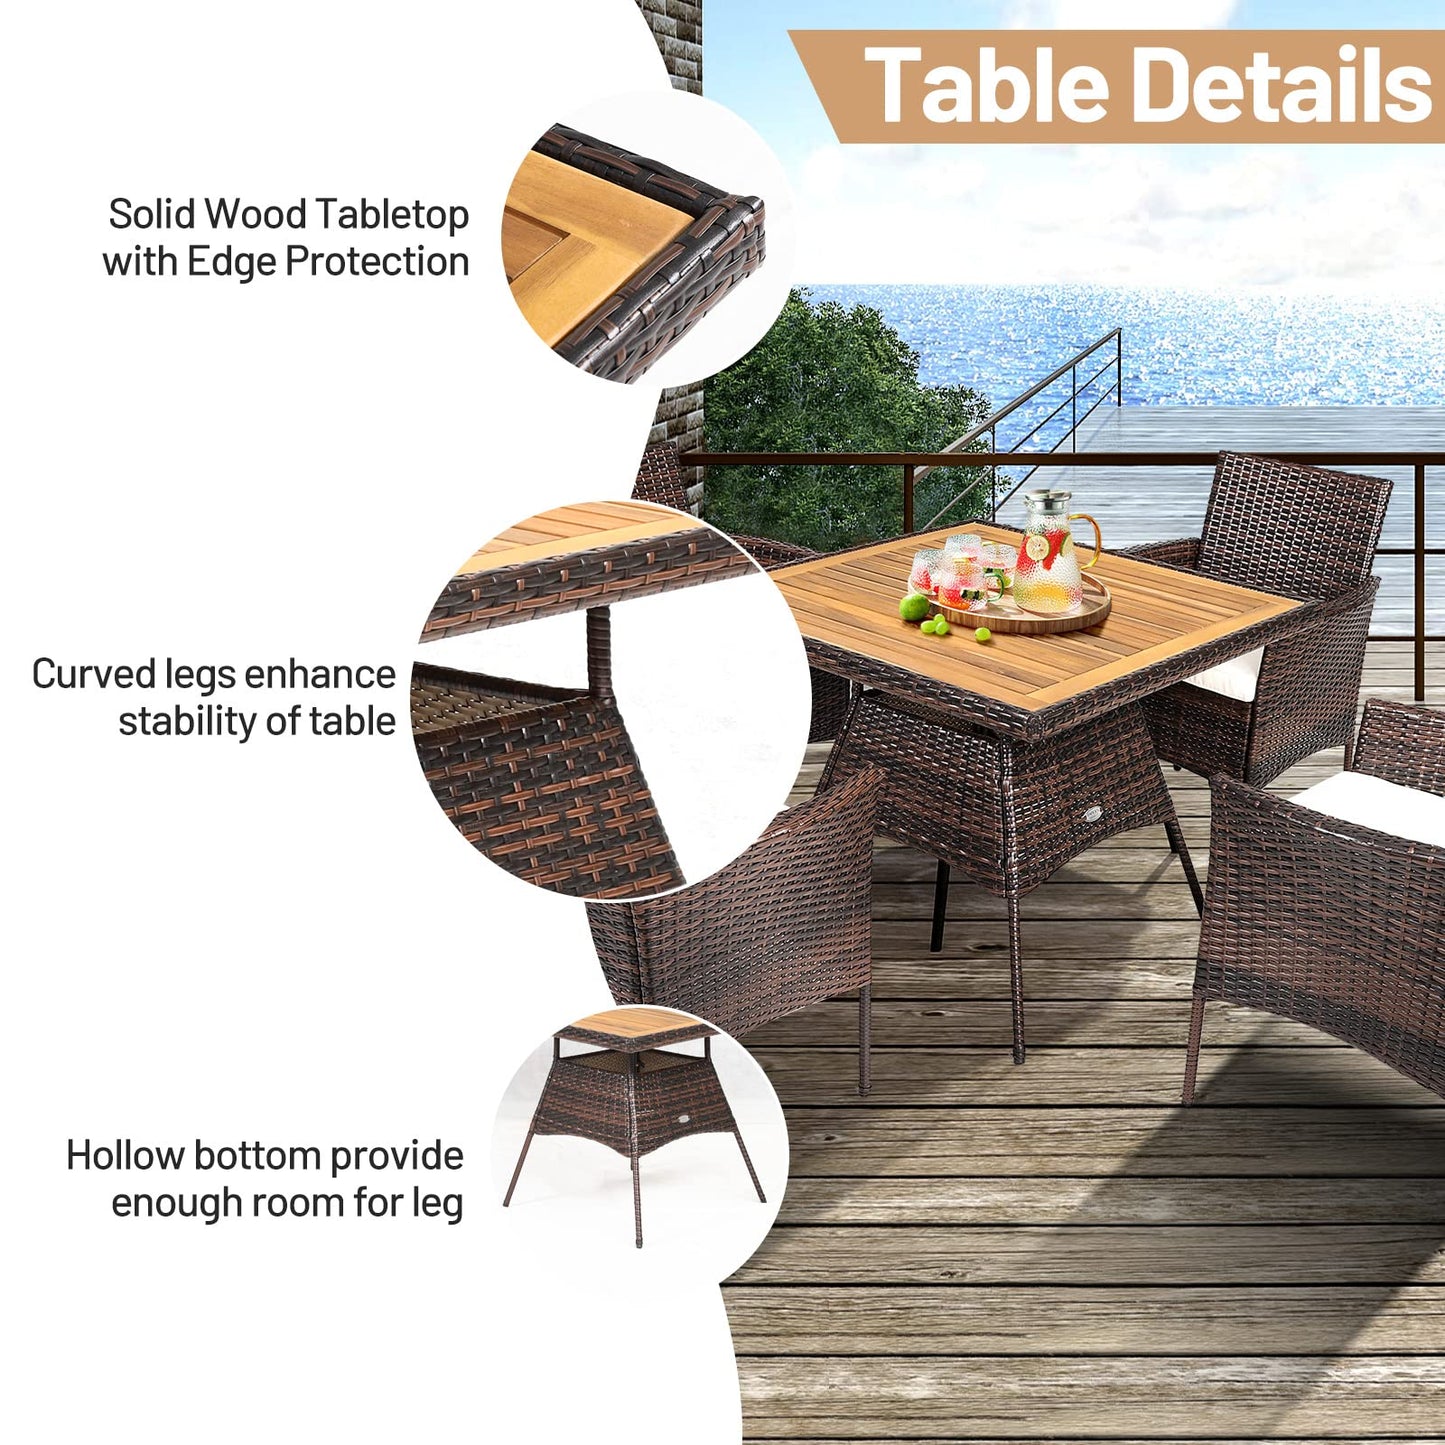 Tangkula 5 Pieces Wicker Patio Dining Set, Outdoor Acacia Wood Dining Furniture with 4 Armrest Chairs & 1 Dining Table, Rattan Conversation Set with Cushions & Umbrella Hole for Backyard Garden Porch